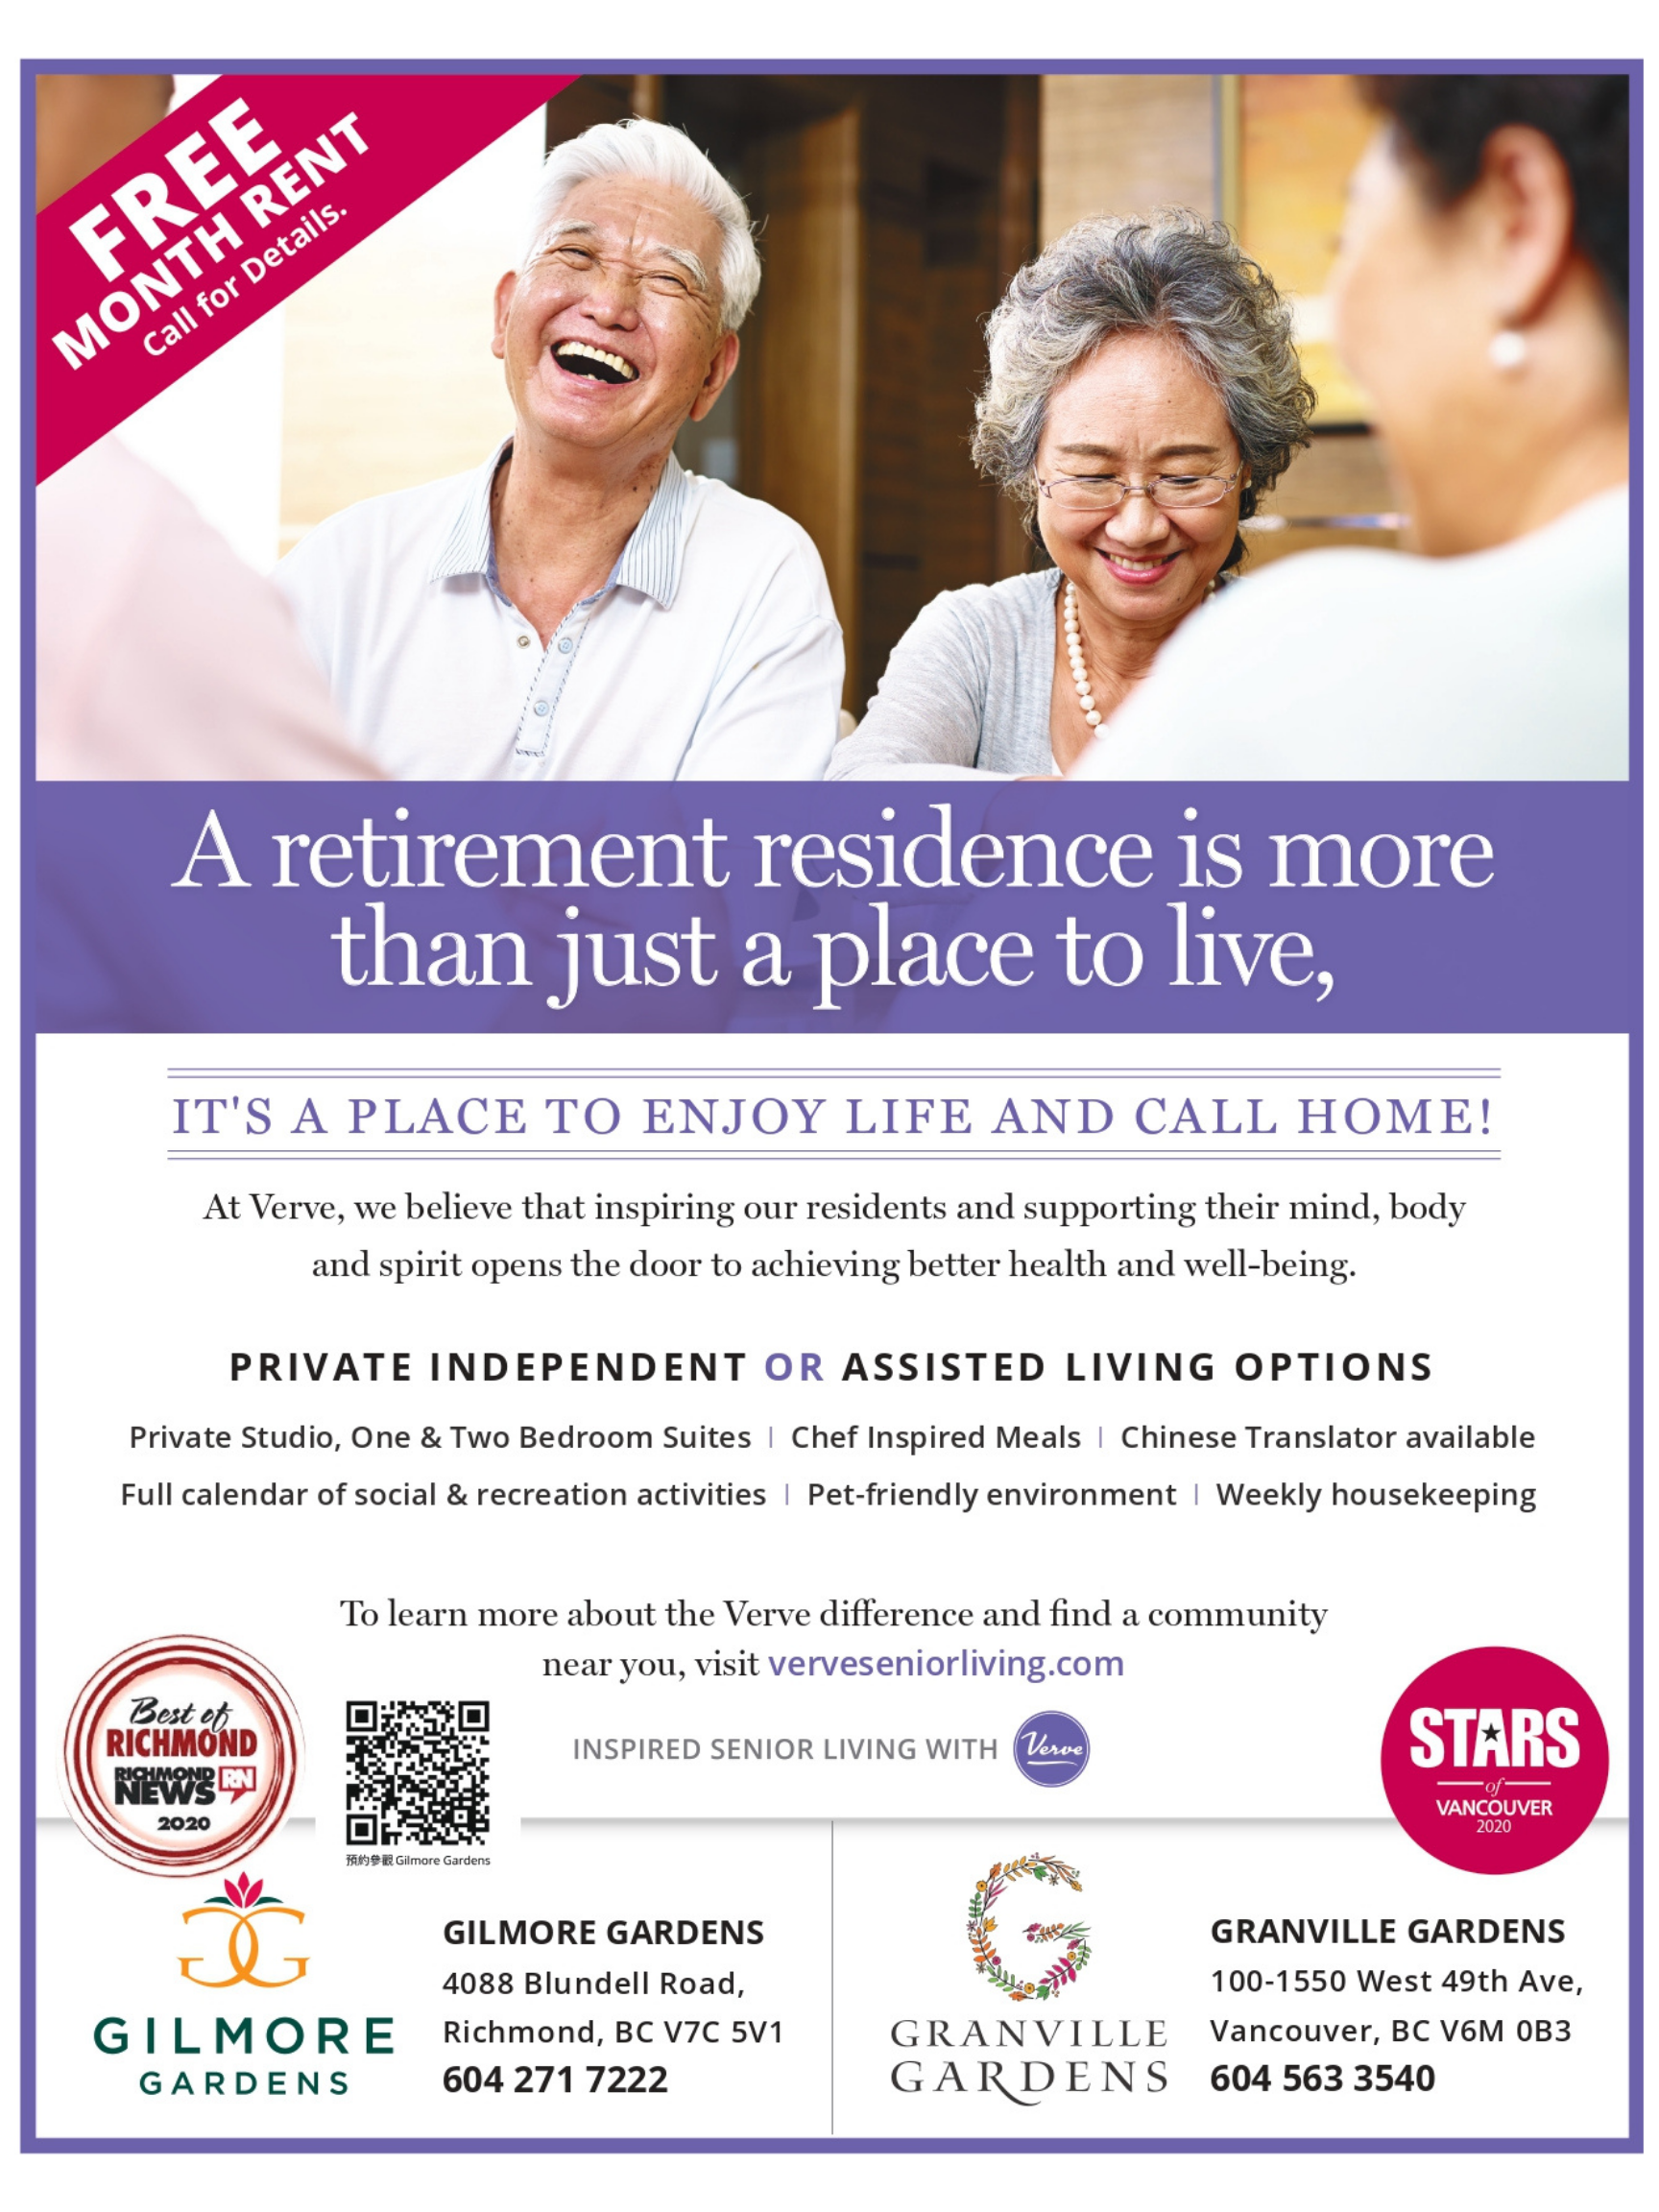 Granville Gardens Retirement Residence Offer! One Month Free Rent!